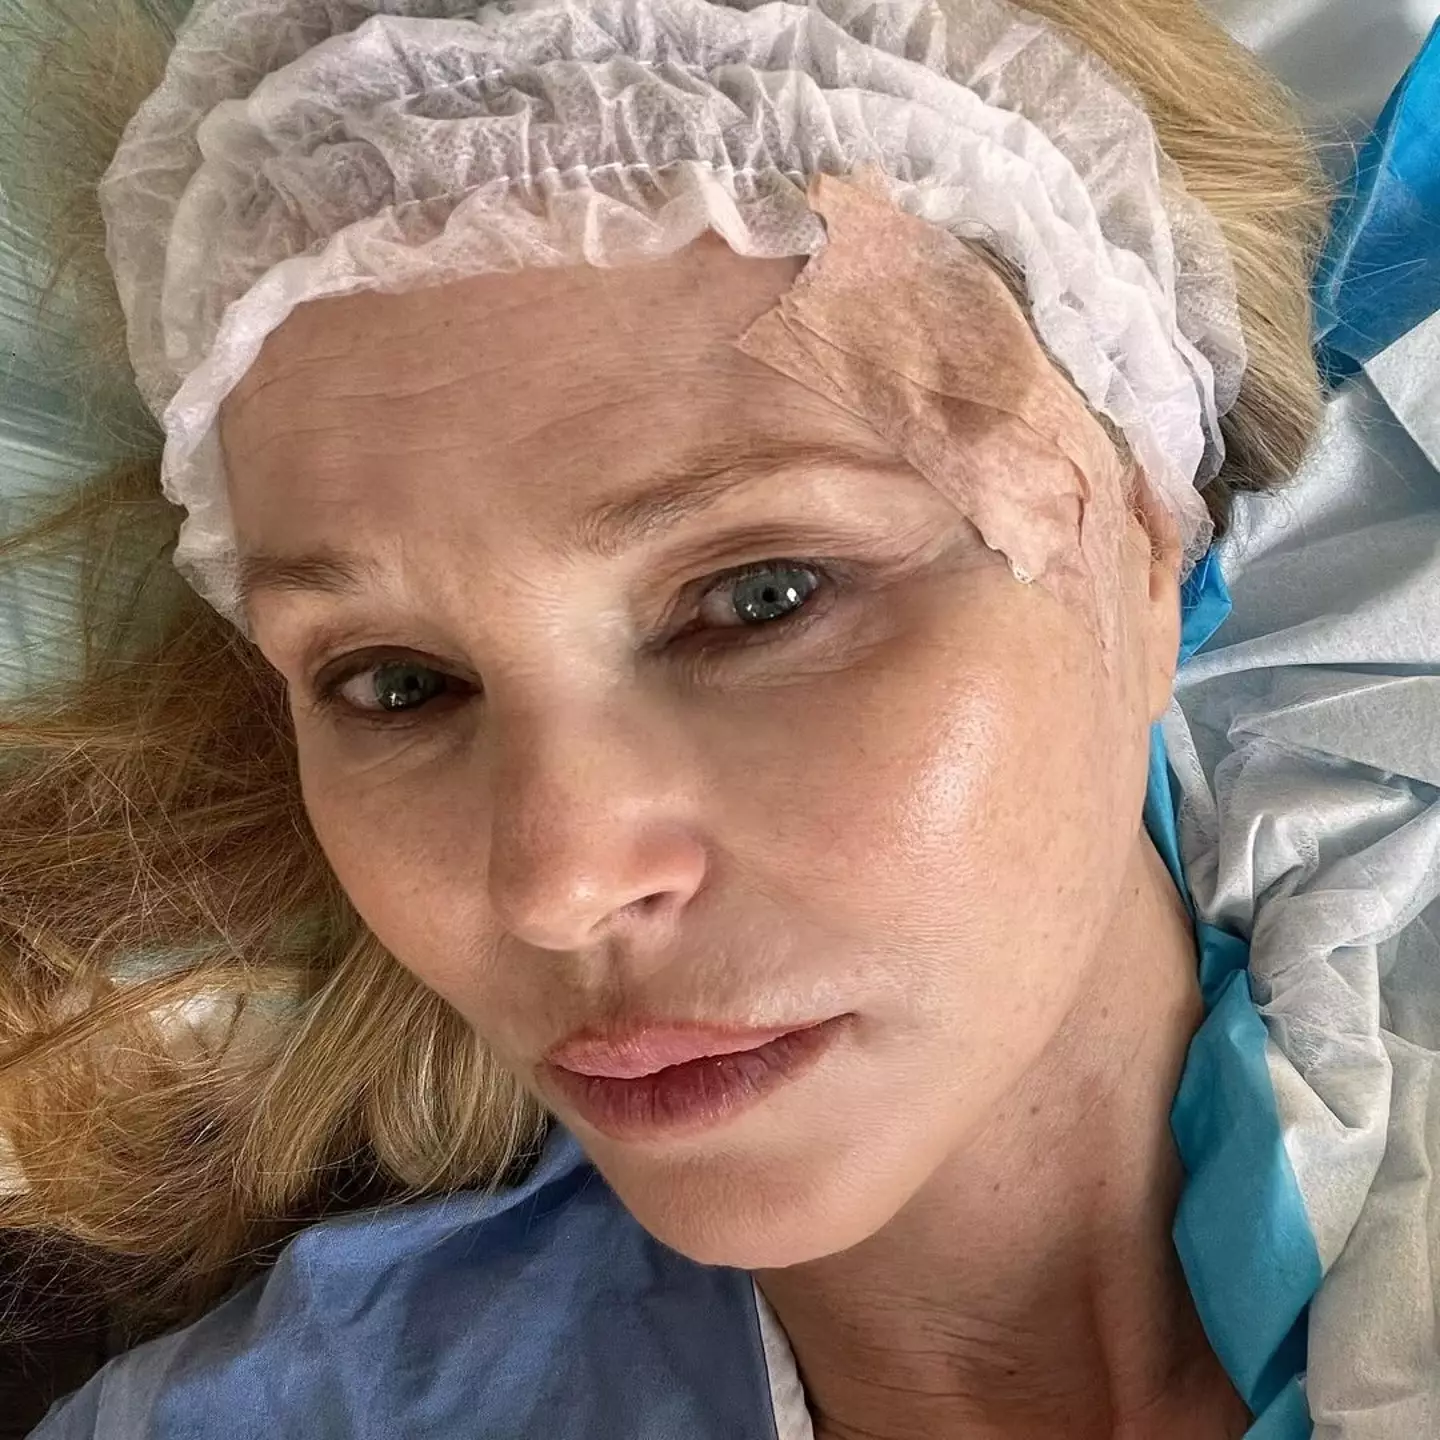 Christie Brinkley, 70, took to Instagram to share a health update.